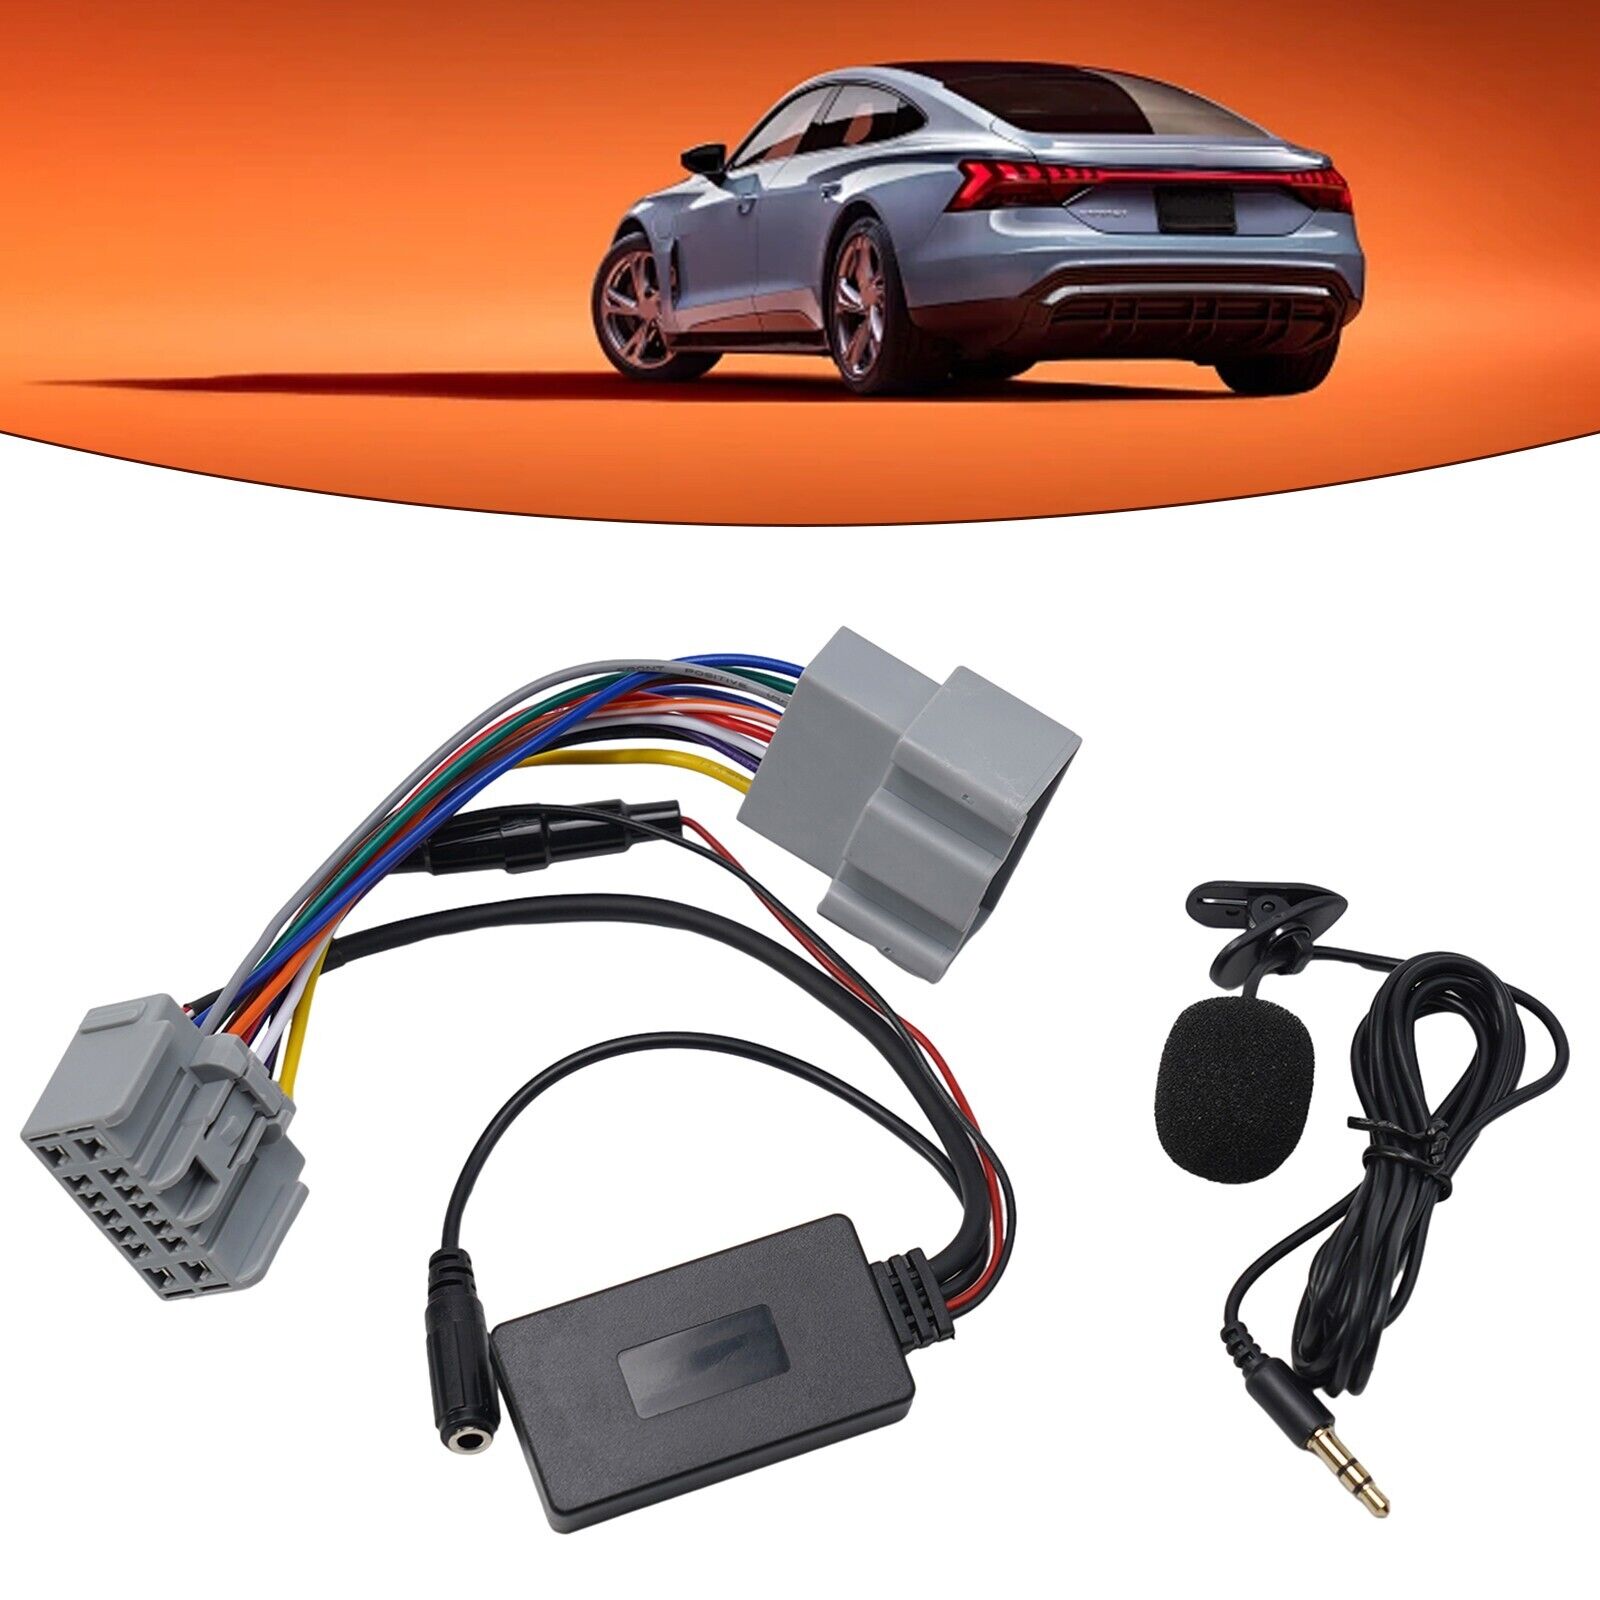 Accurate Testing Design AUX Audio Cable Adapter for Volvo S60 S80 V50 V70 Car